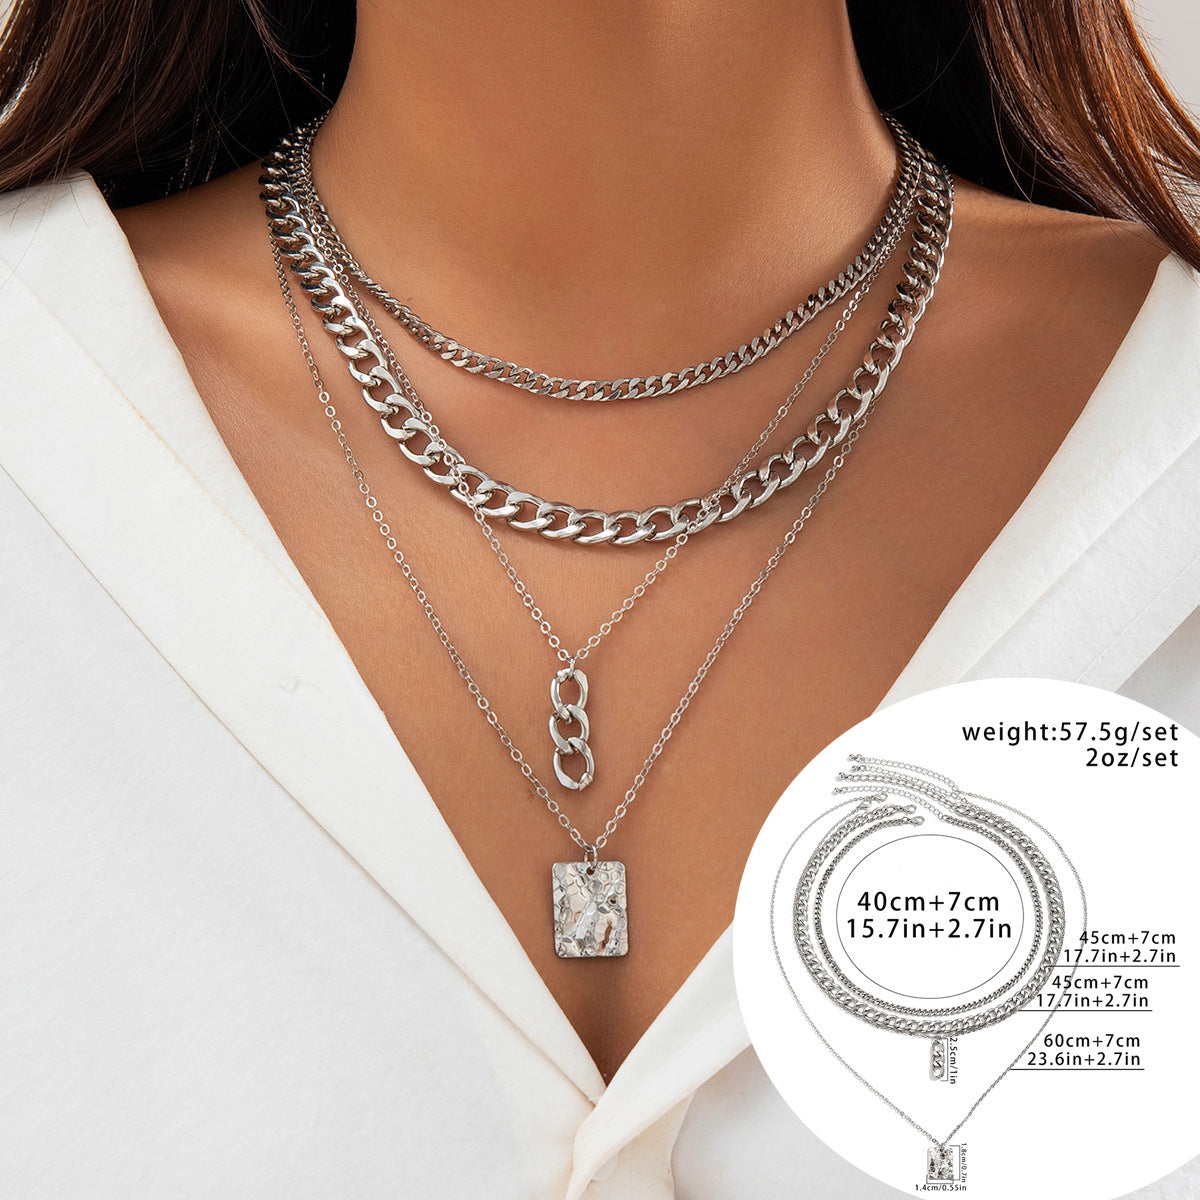 Vienna Verve Collection by Planderful - Stylish Necklace Featuring Snake Skin Design and Geometric Pendant